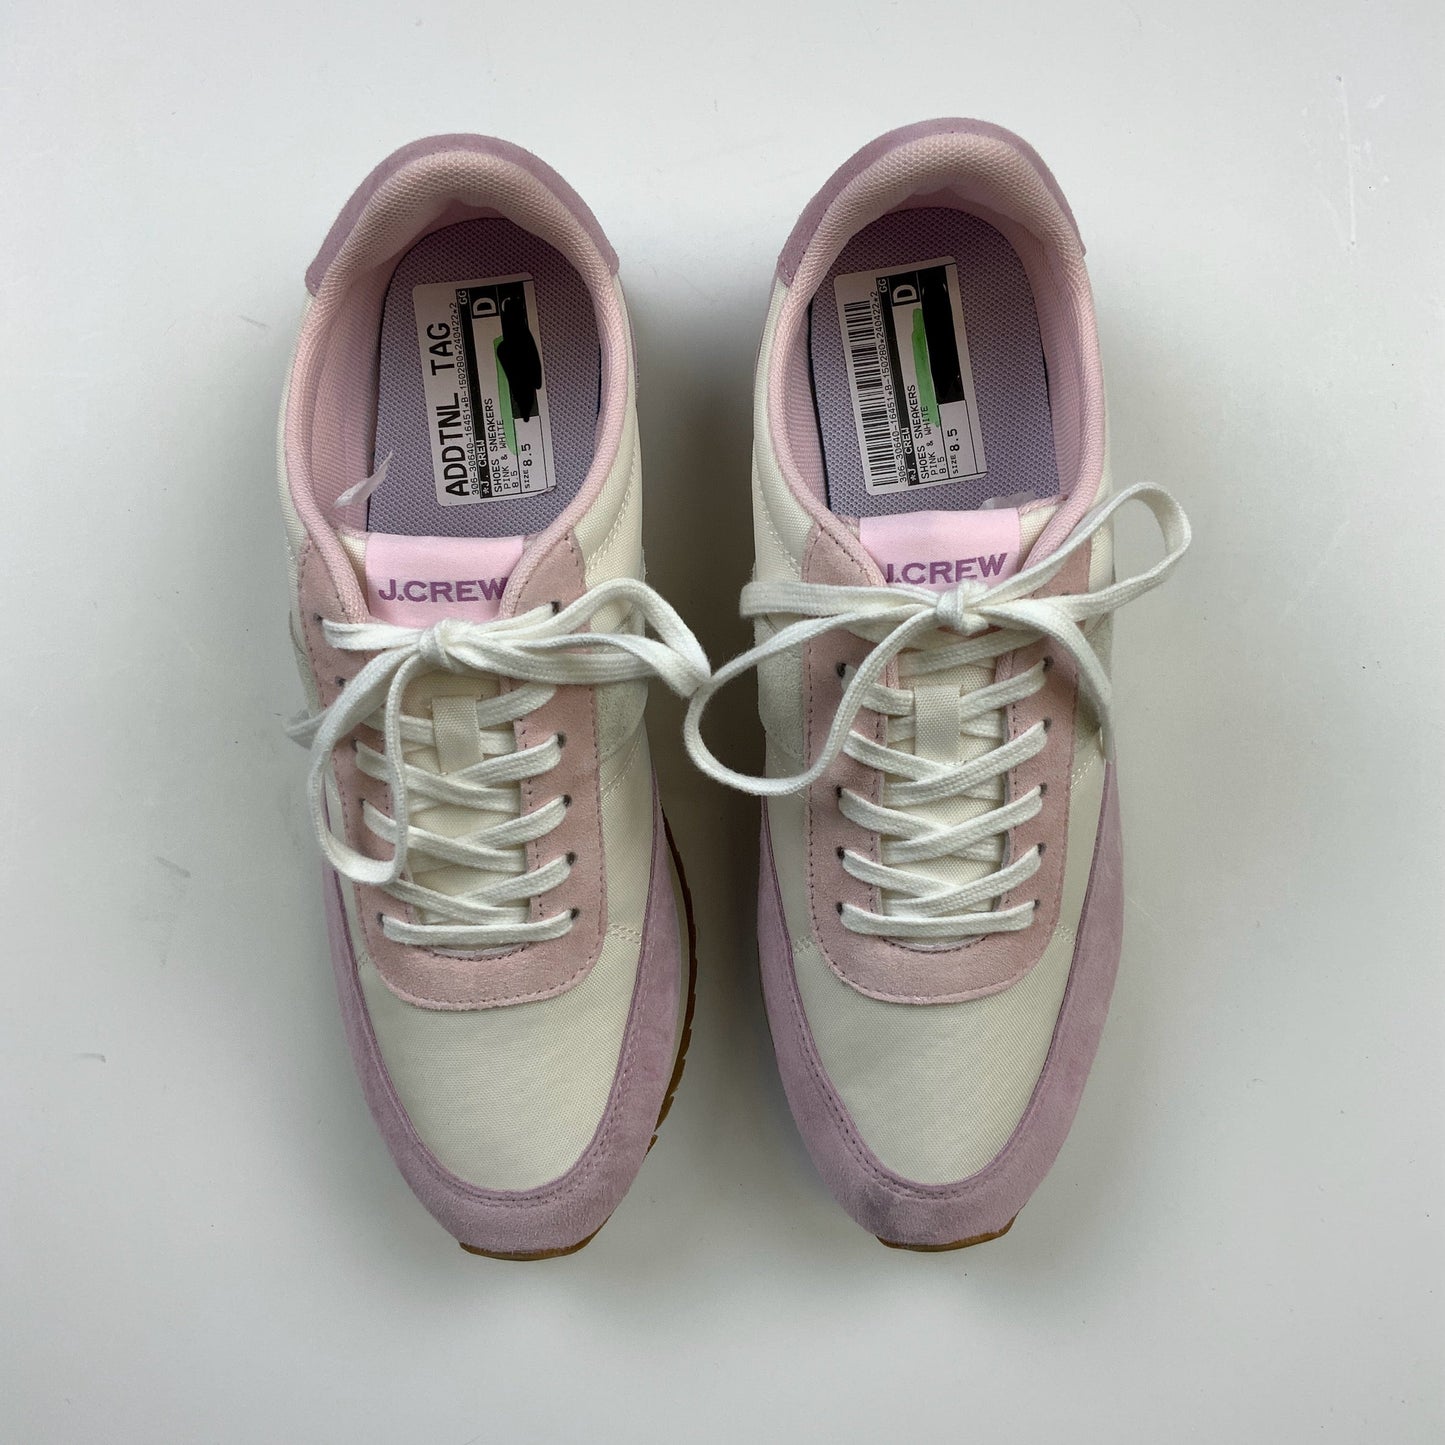 Pink & White Shoes Sneakers J. Crew, Size 8.5